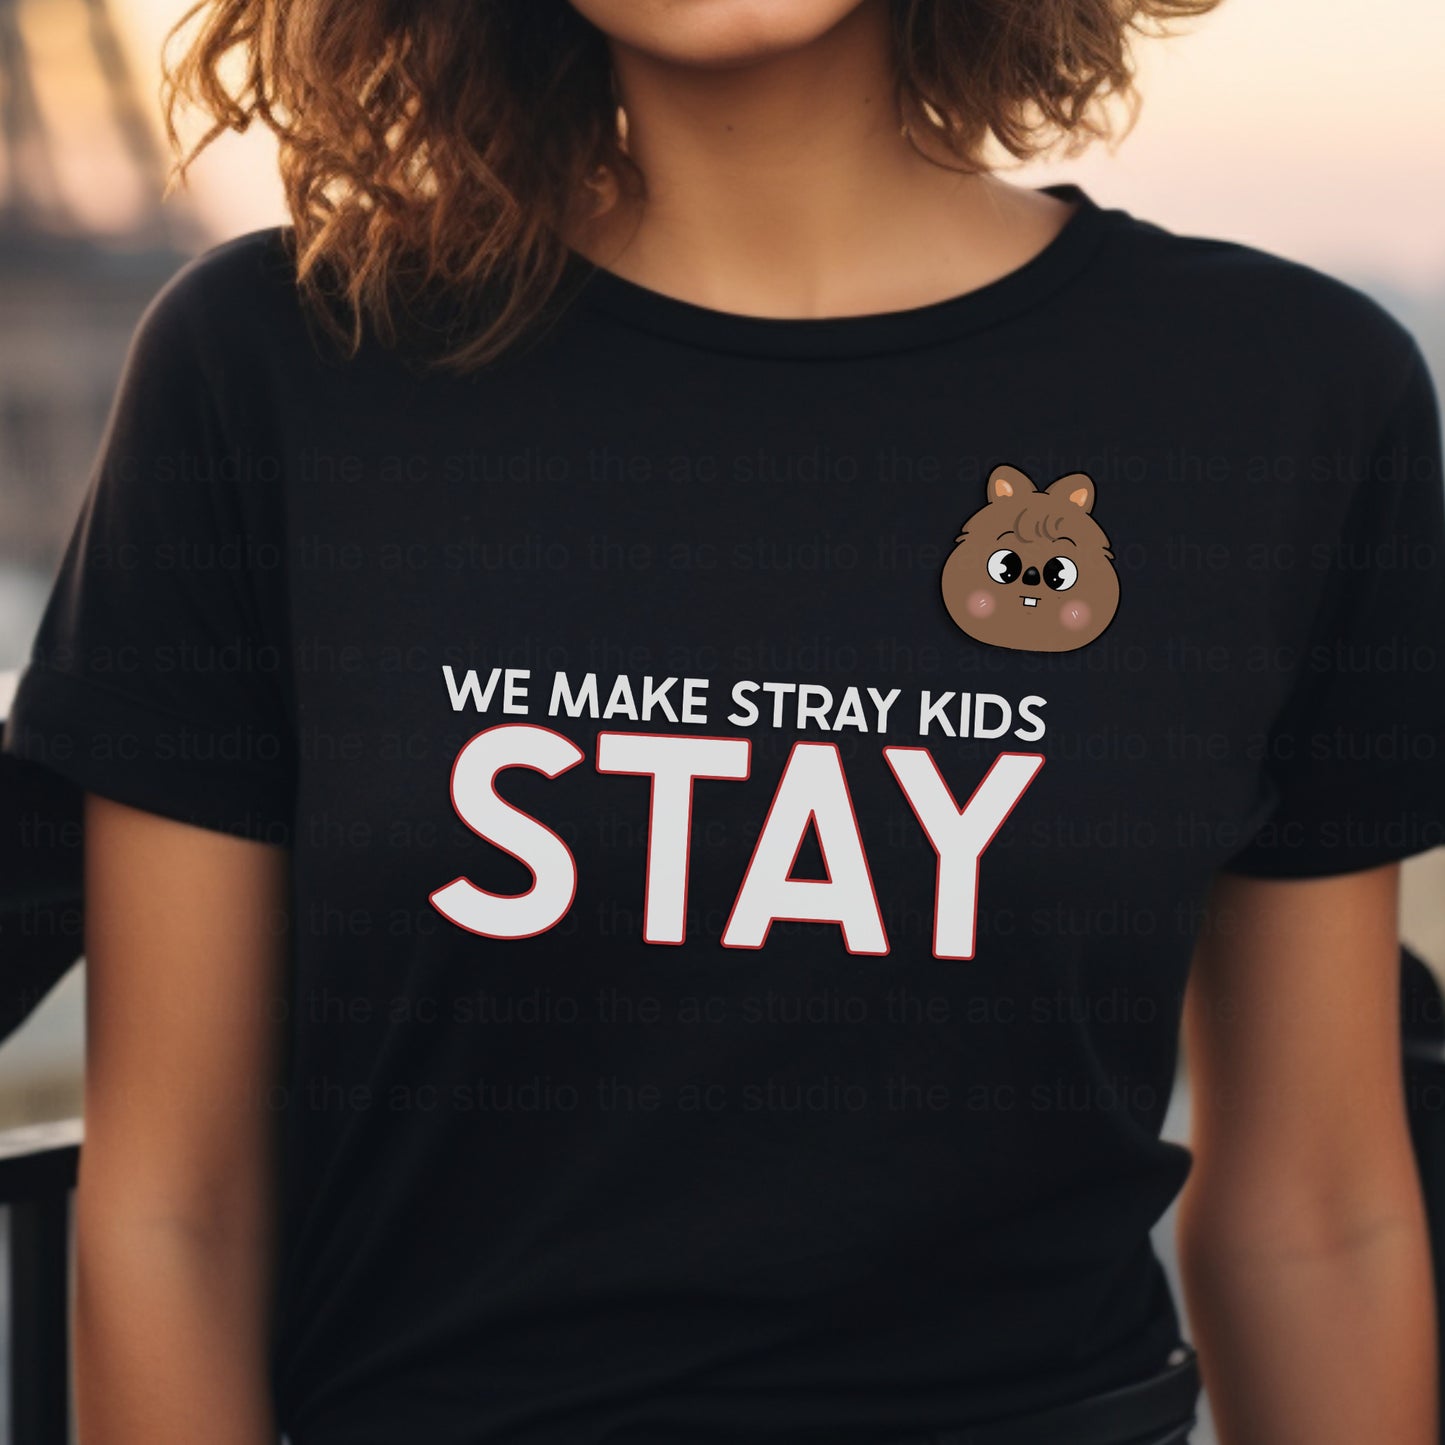 STAY - We Make SK Stay T-Shirt (Black)